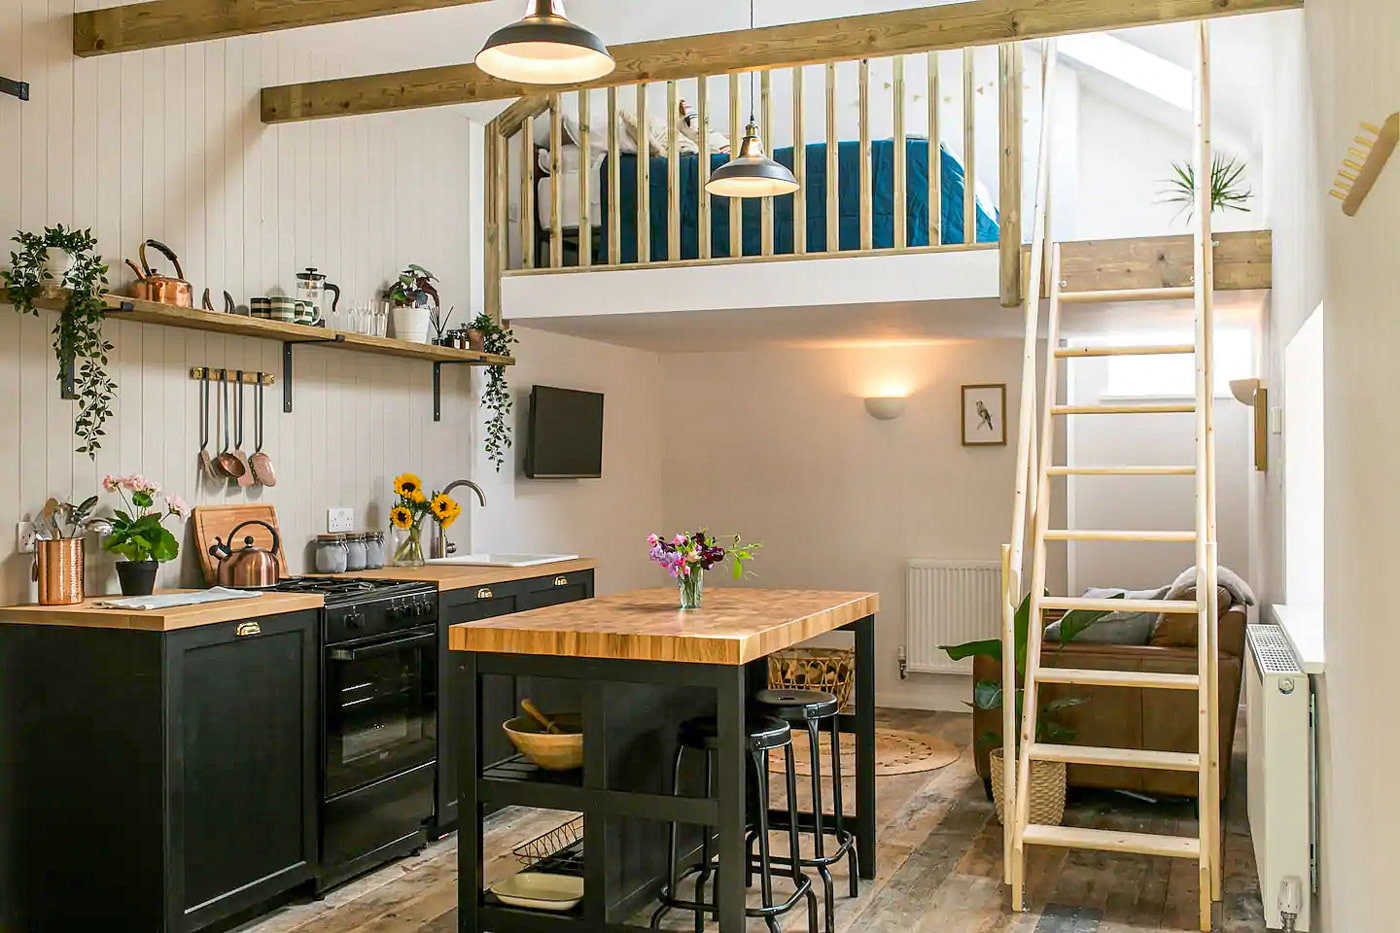 Converted dairy shed in Cornwall